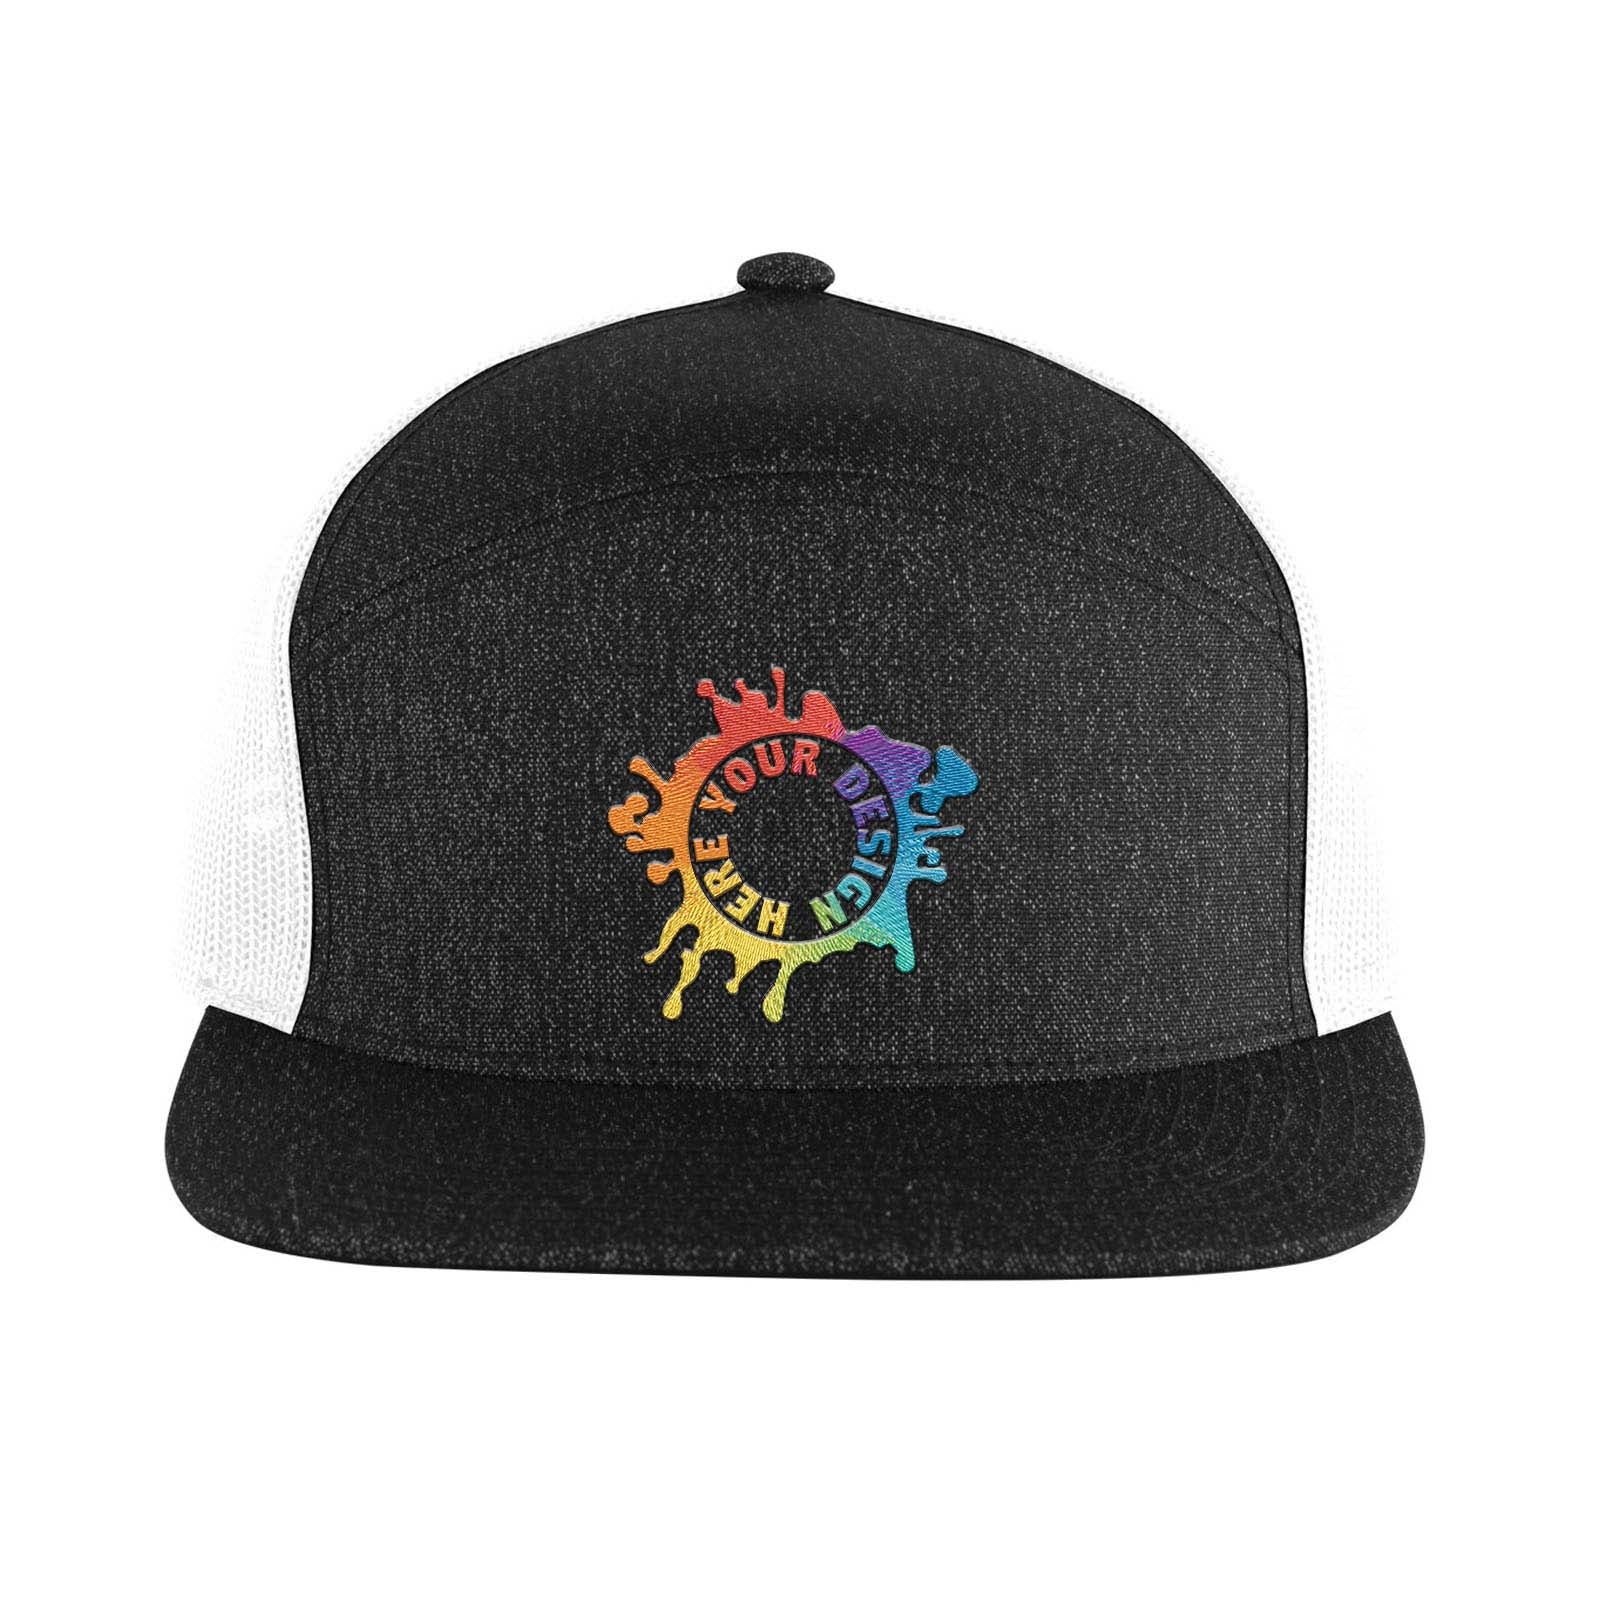 Embroidered Pacific Headwear Heathered 6-Panel Arch Trucker Snapback Cap